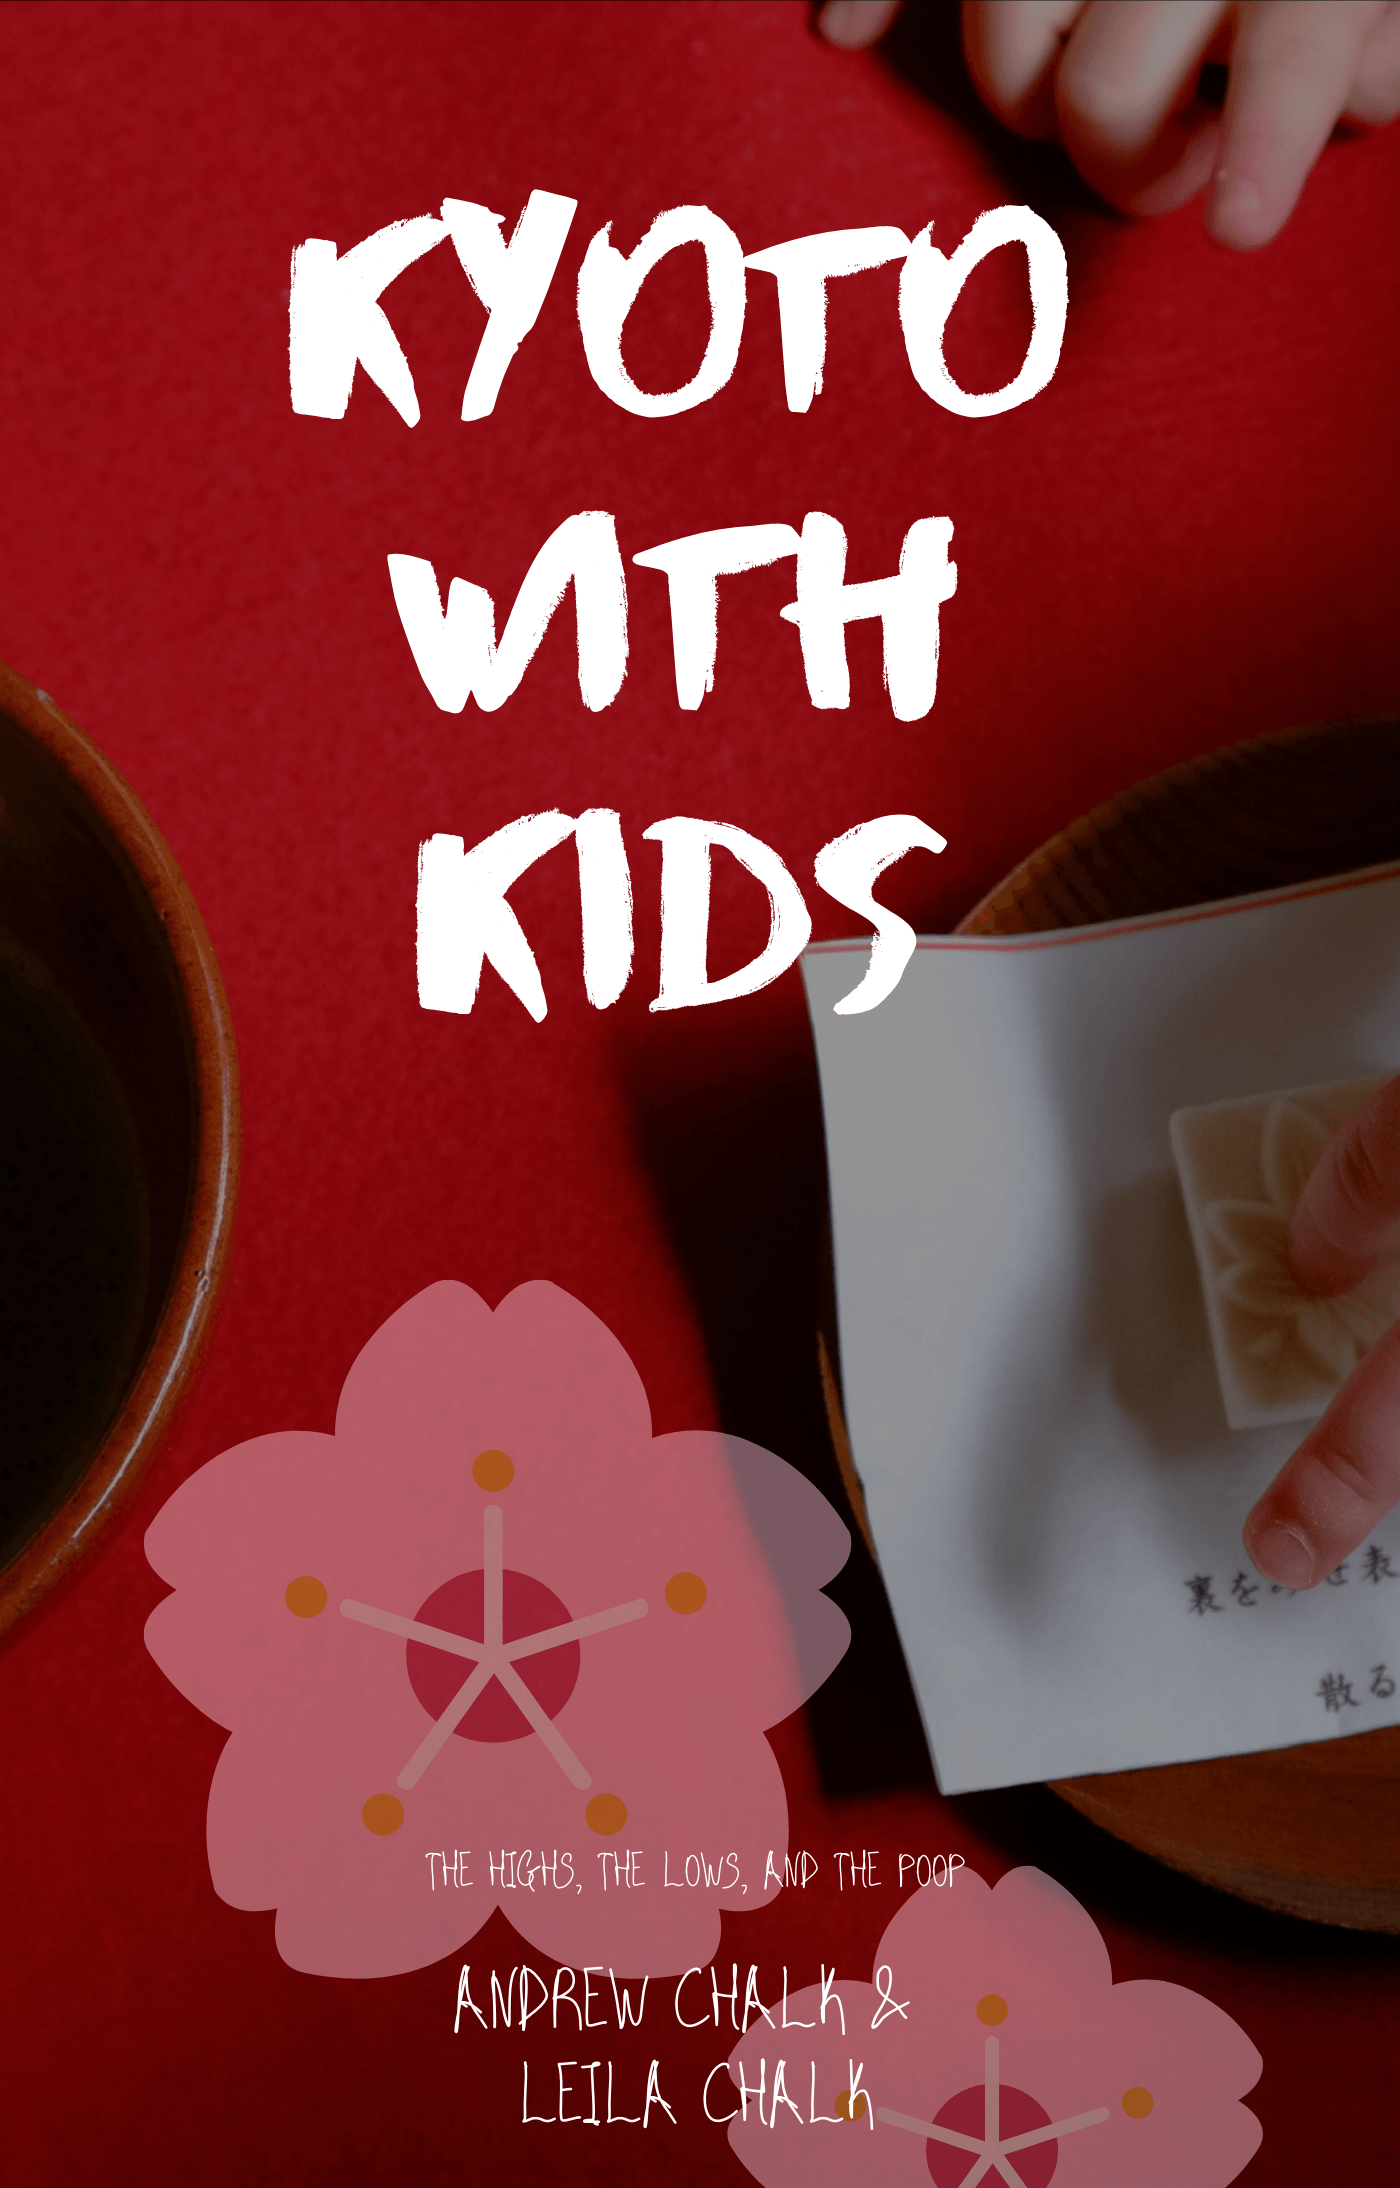 Kyoto With Kids by Leila Chalk & Andrew Chalk